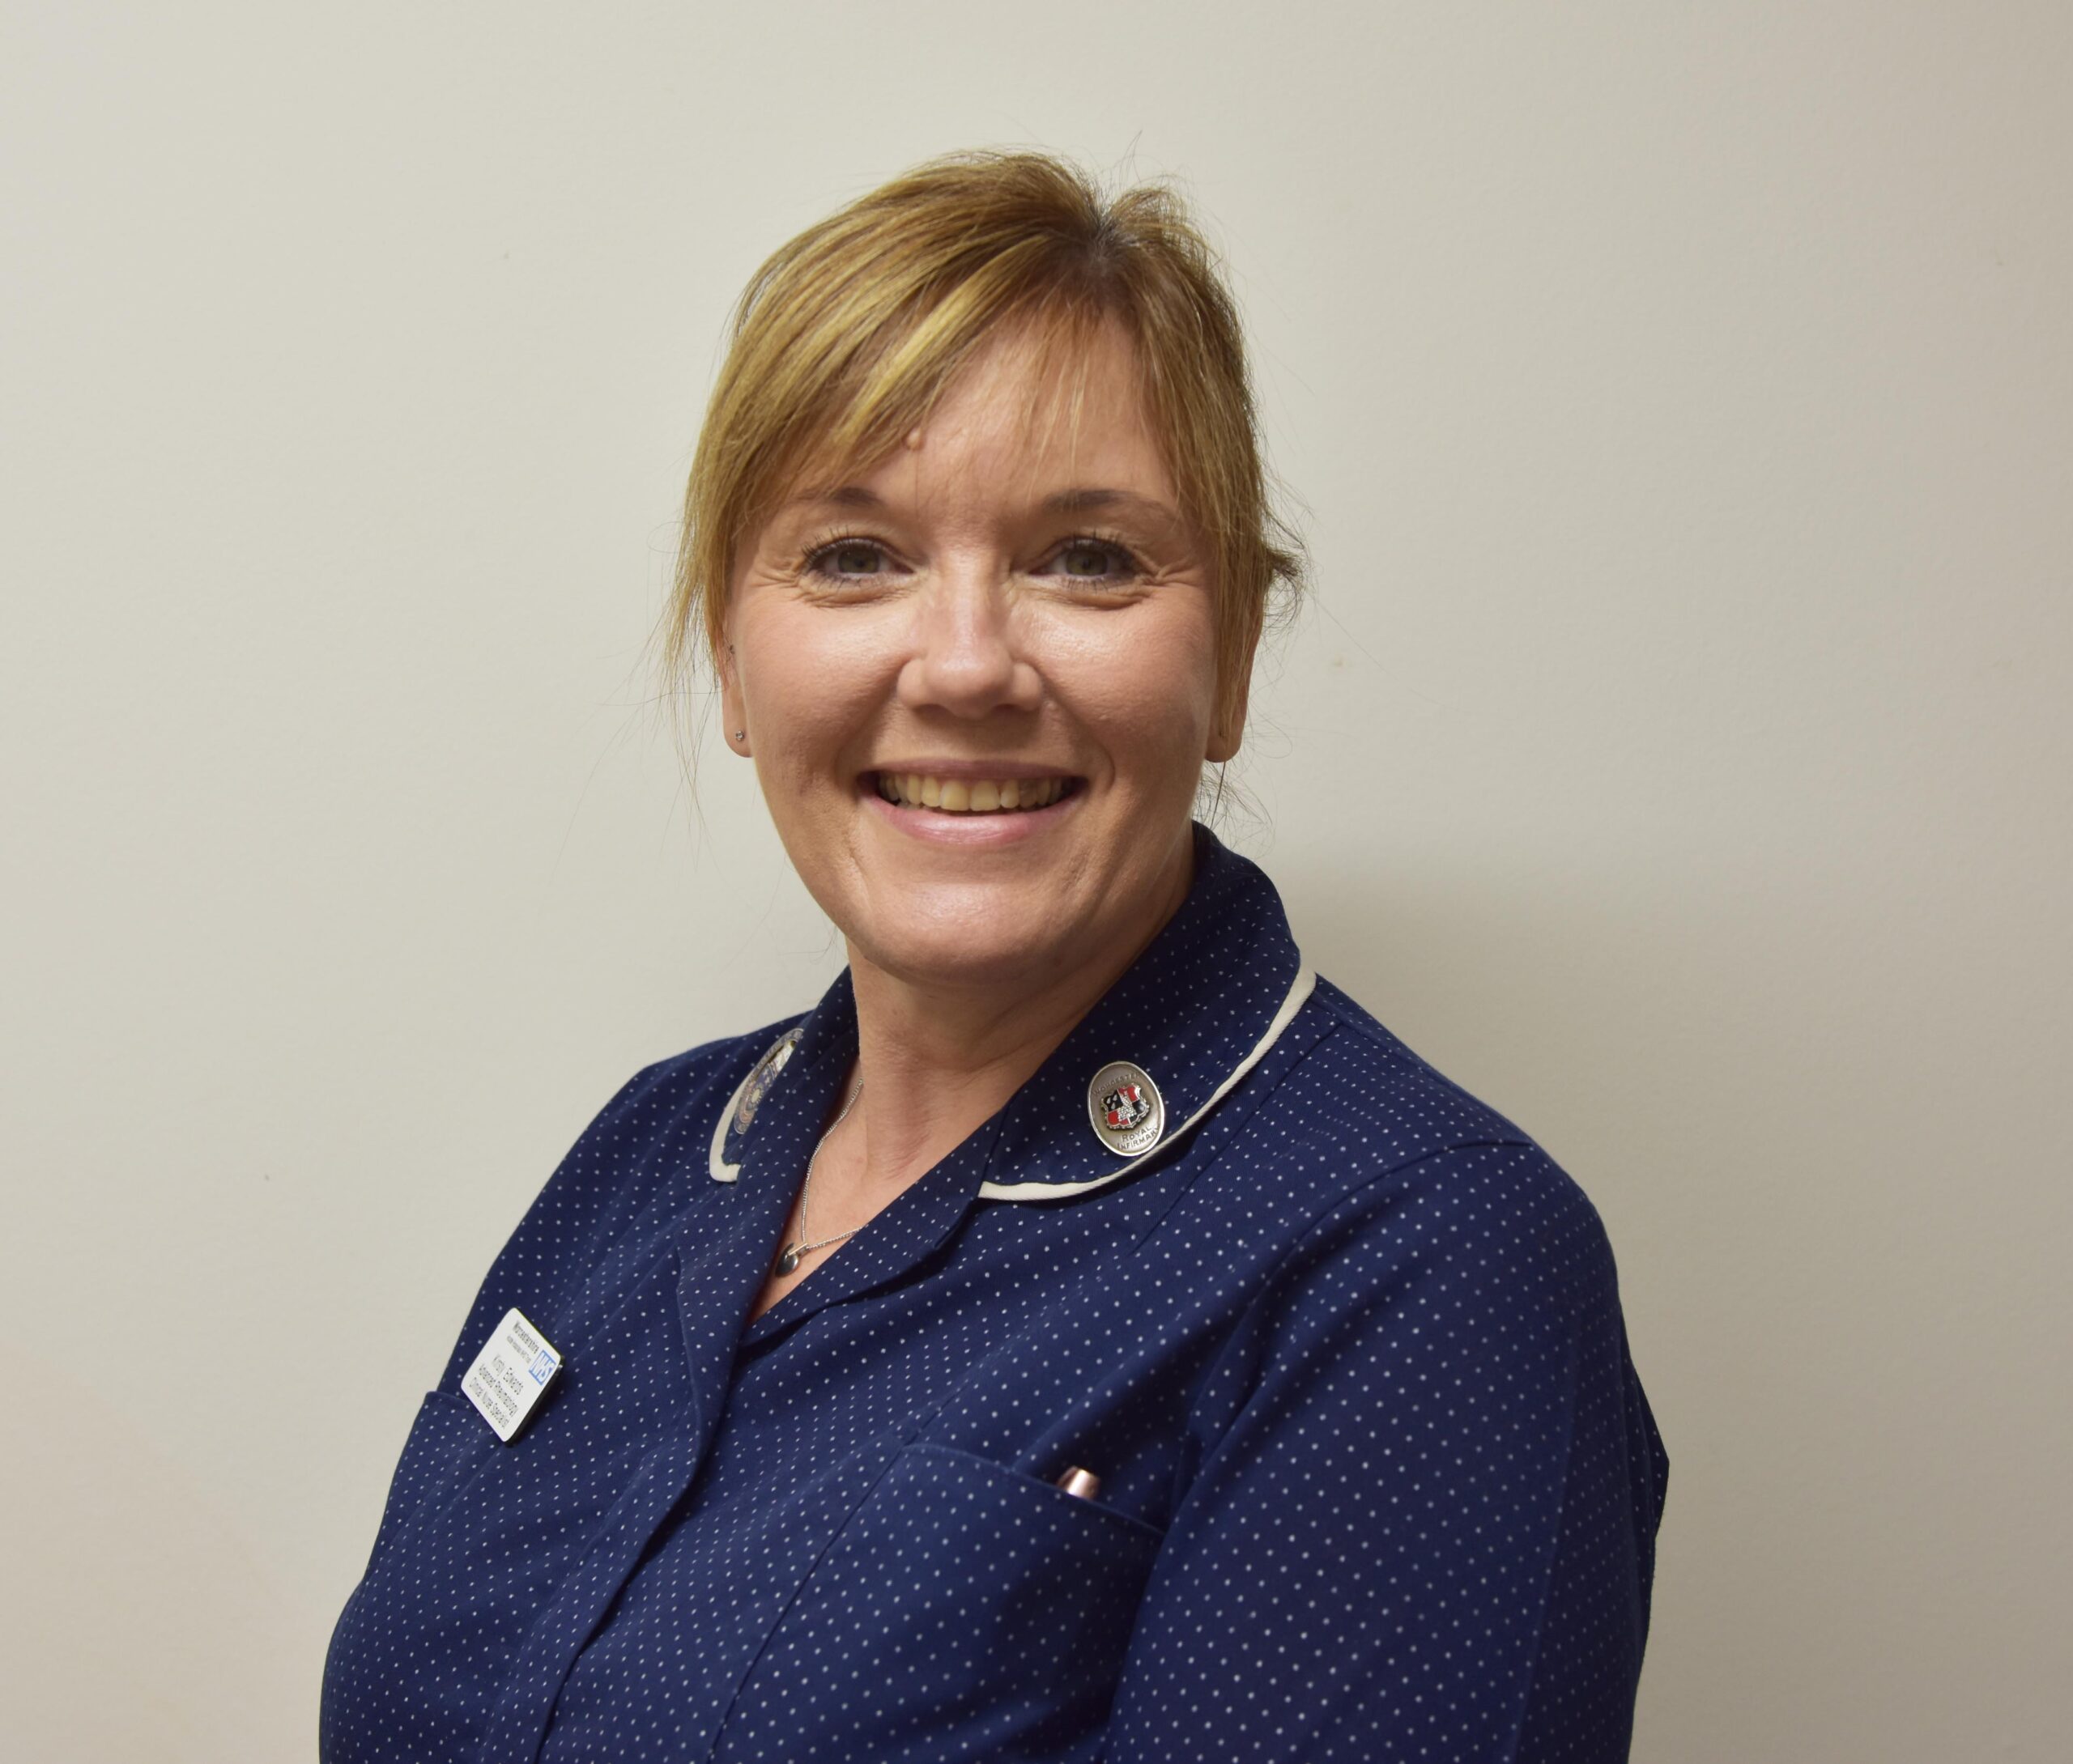 Kirsty Edwards, RGN, NMP, MSc – Advanced Clinical Nurse Specialist in Rheumatology